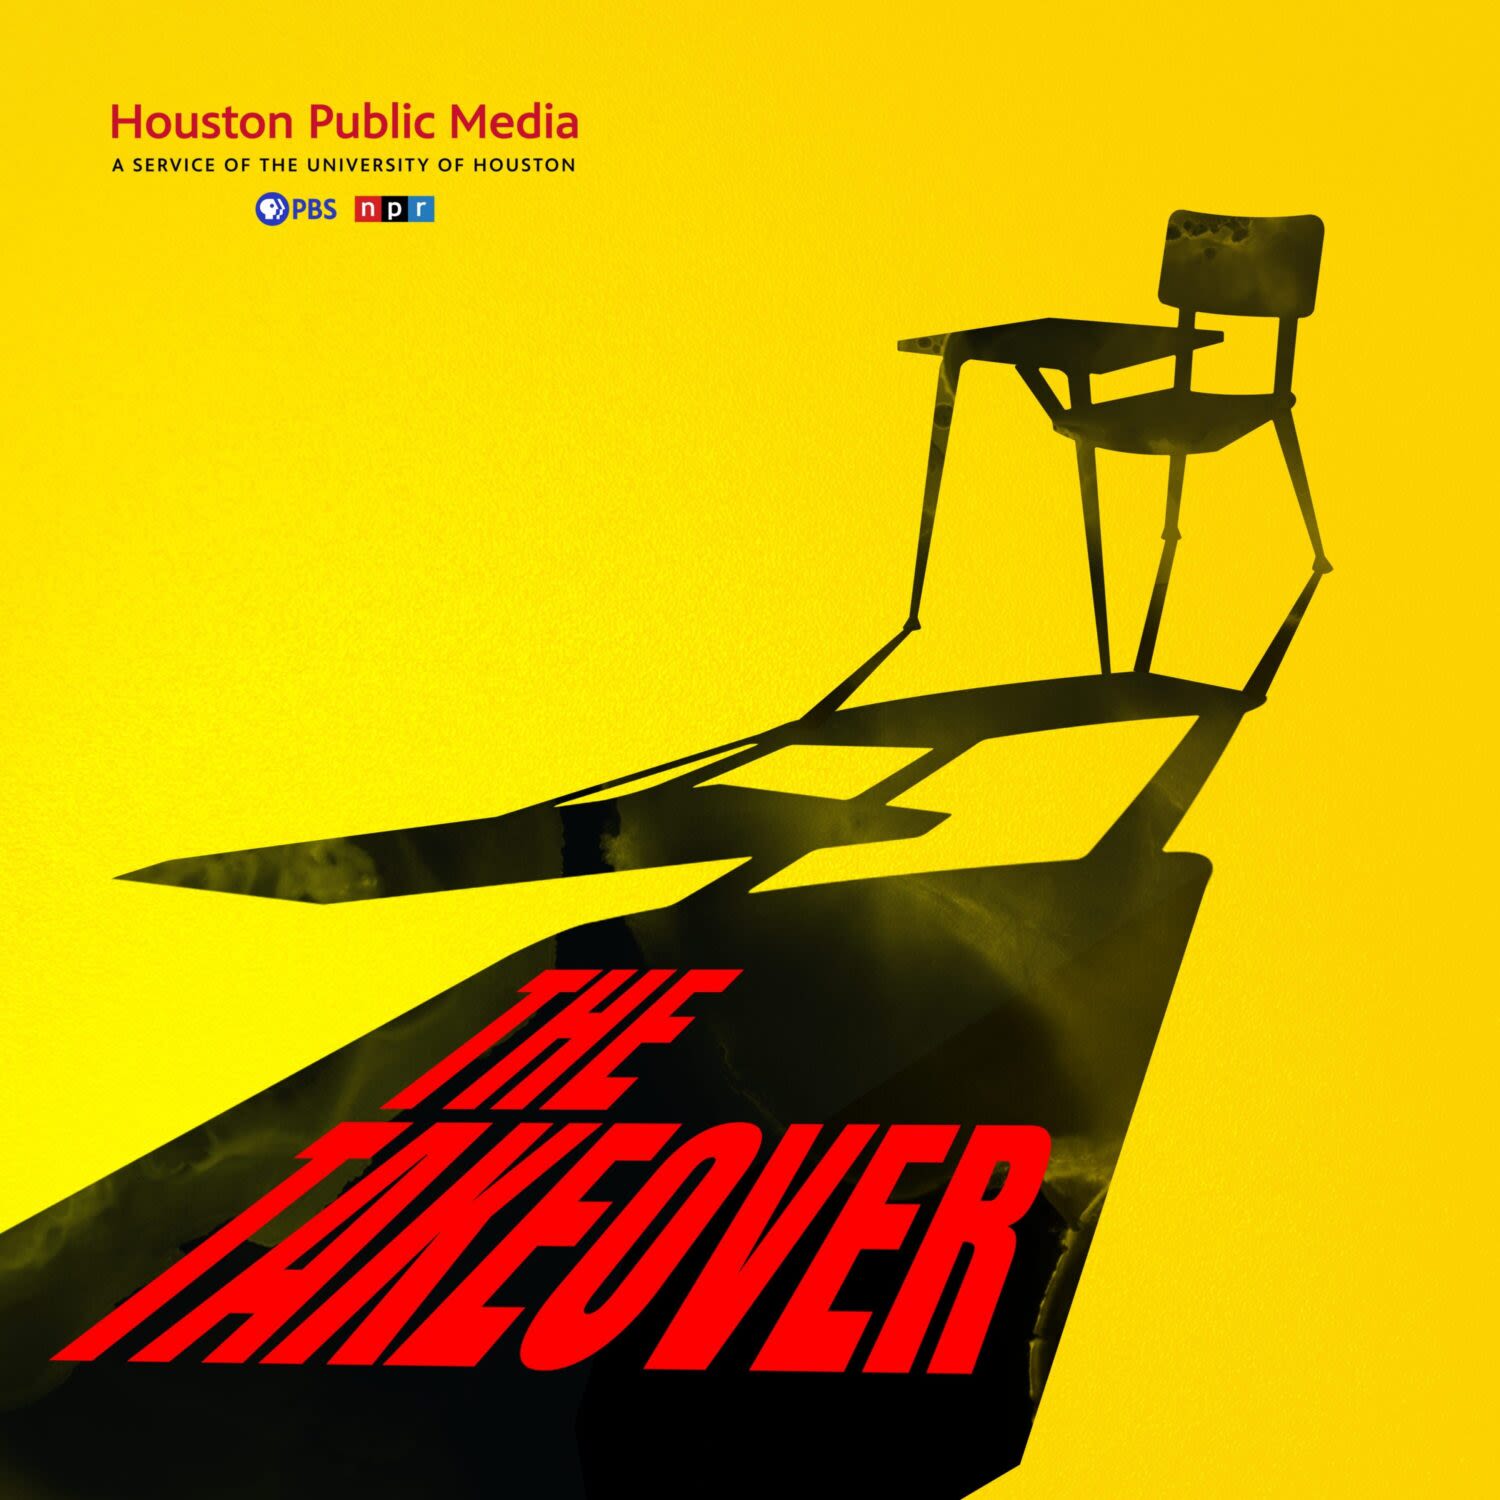 Three revelations from The Takeover, an upcoming podcast about power, public education and Houston ISD | Houston Public Media